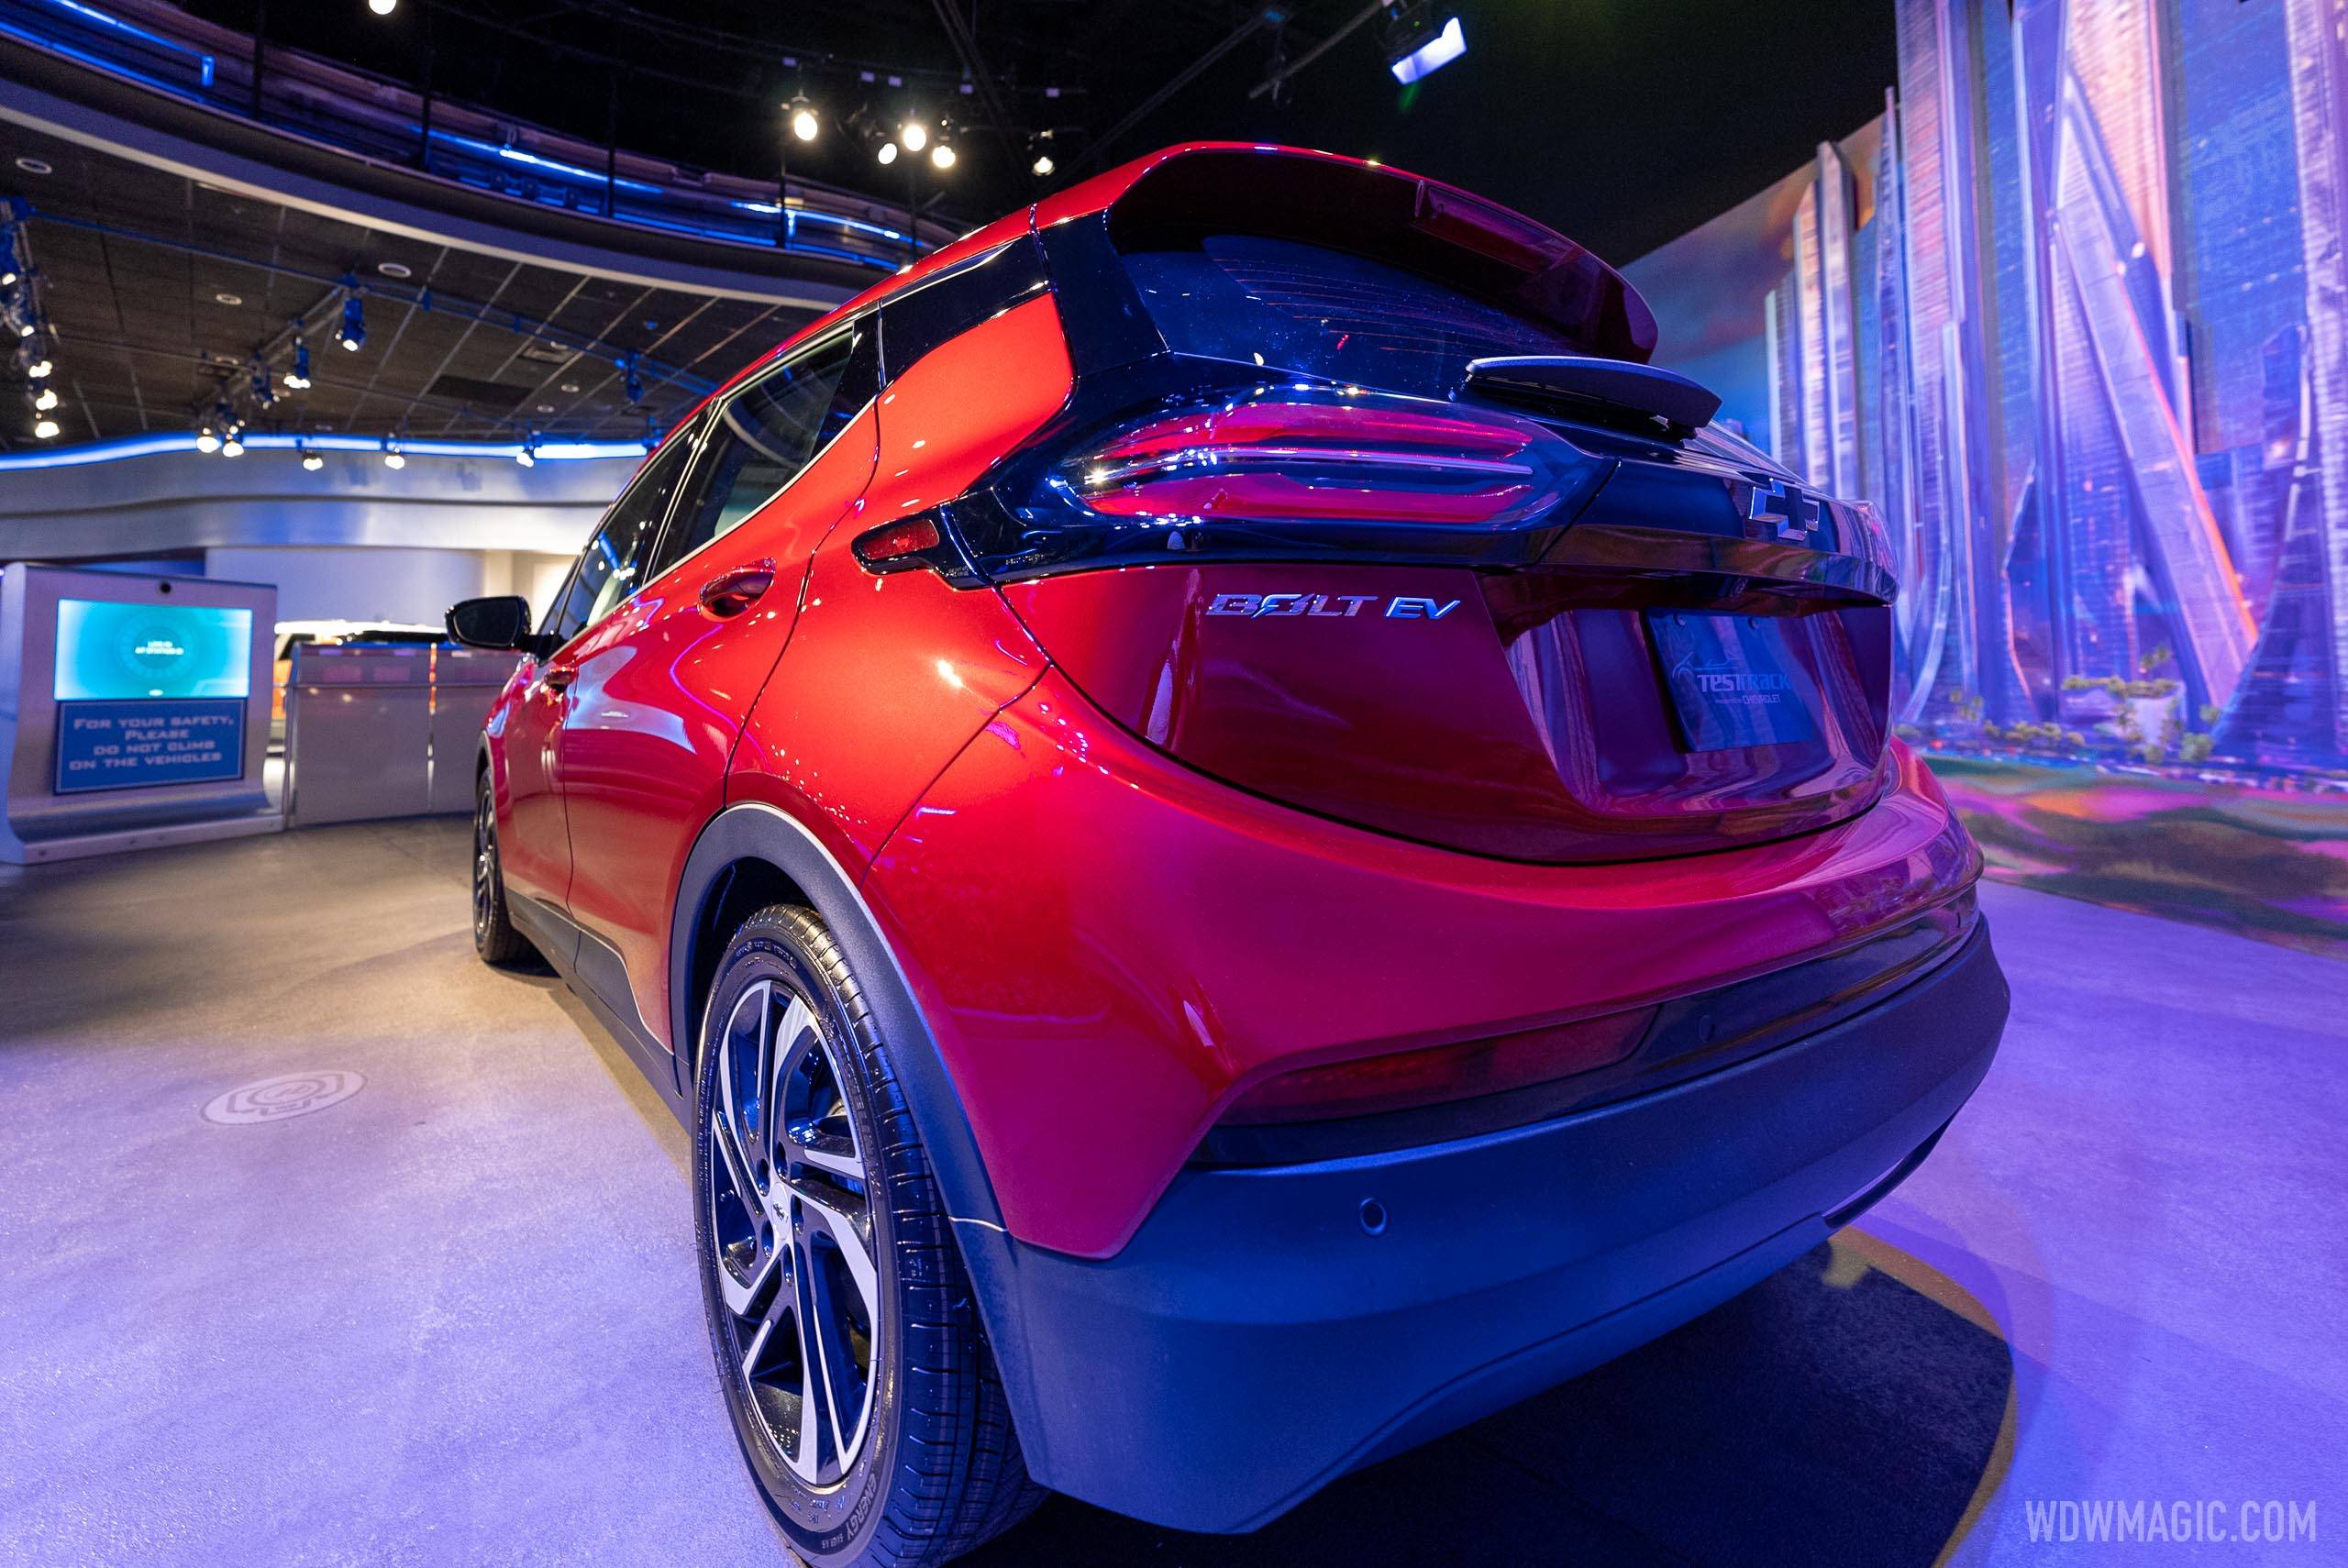 New Chevy BOLT at EPCOT'S Test Track post-show